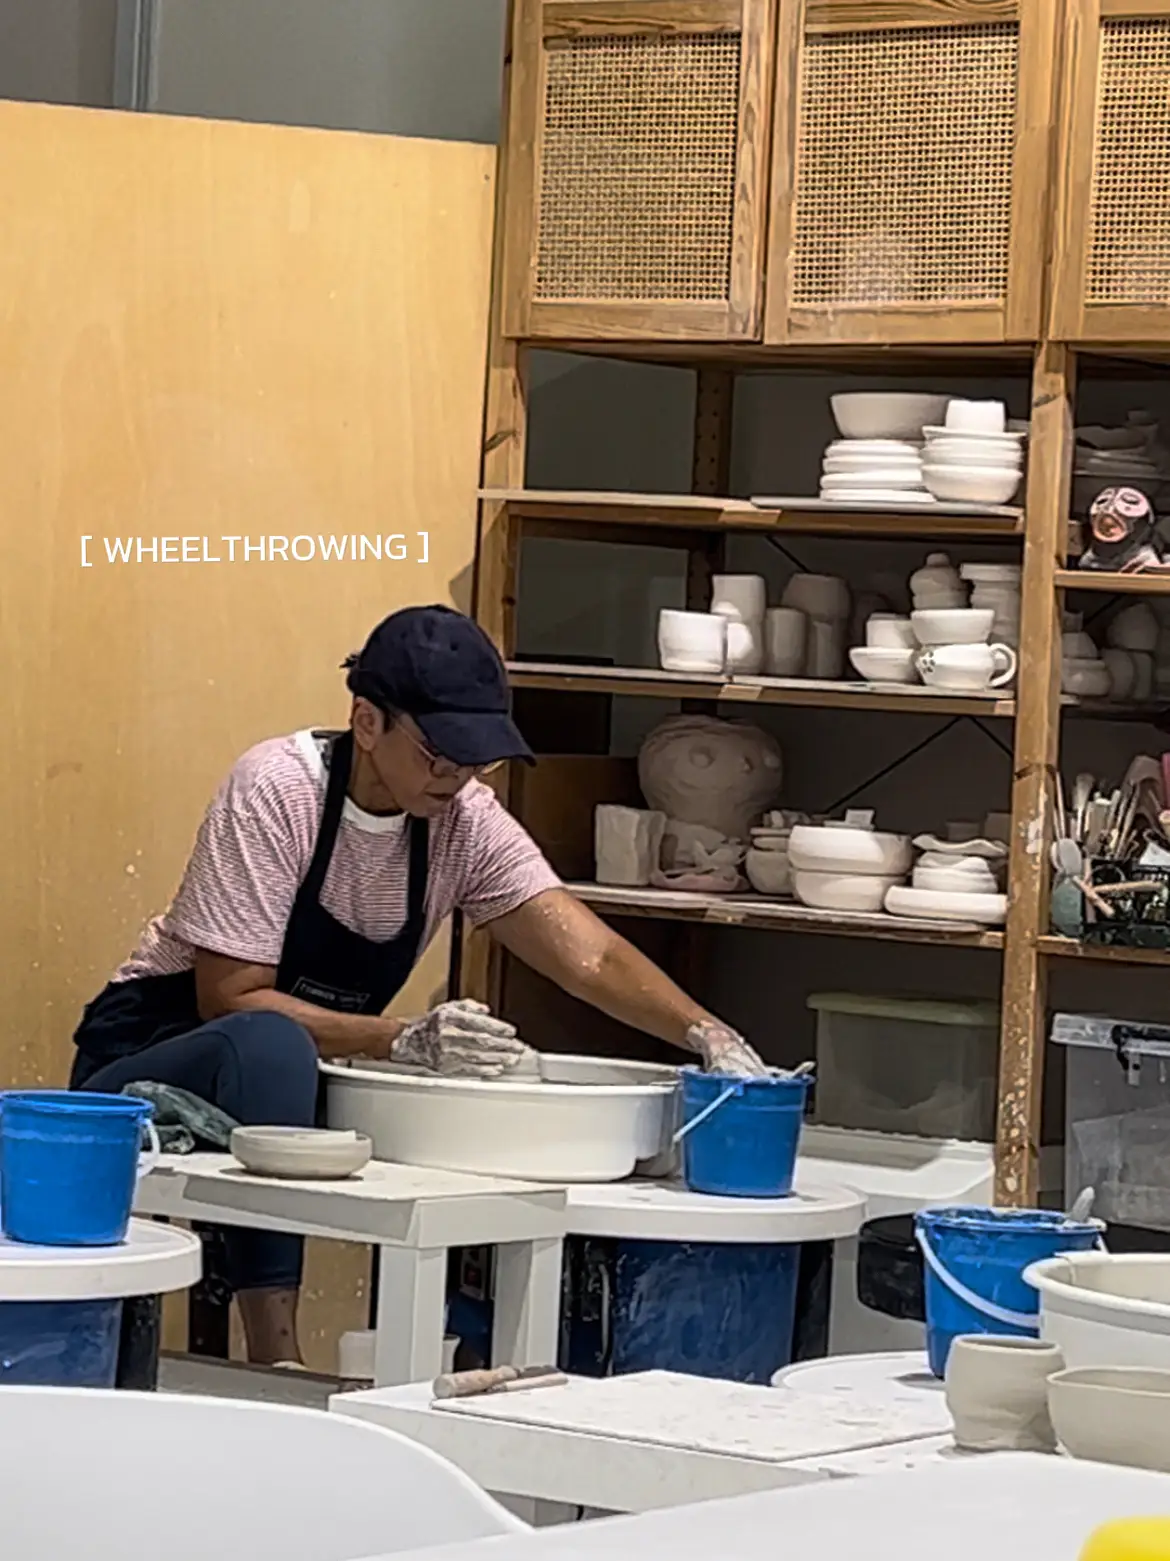 Pottery Do-It-All (3hrs) — The Potters' Guilt